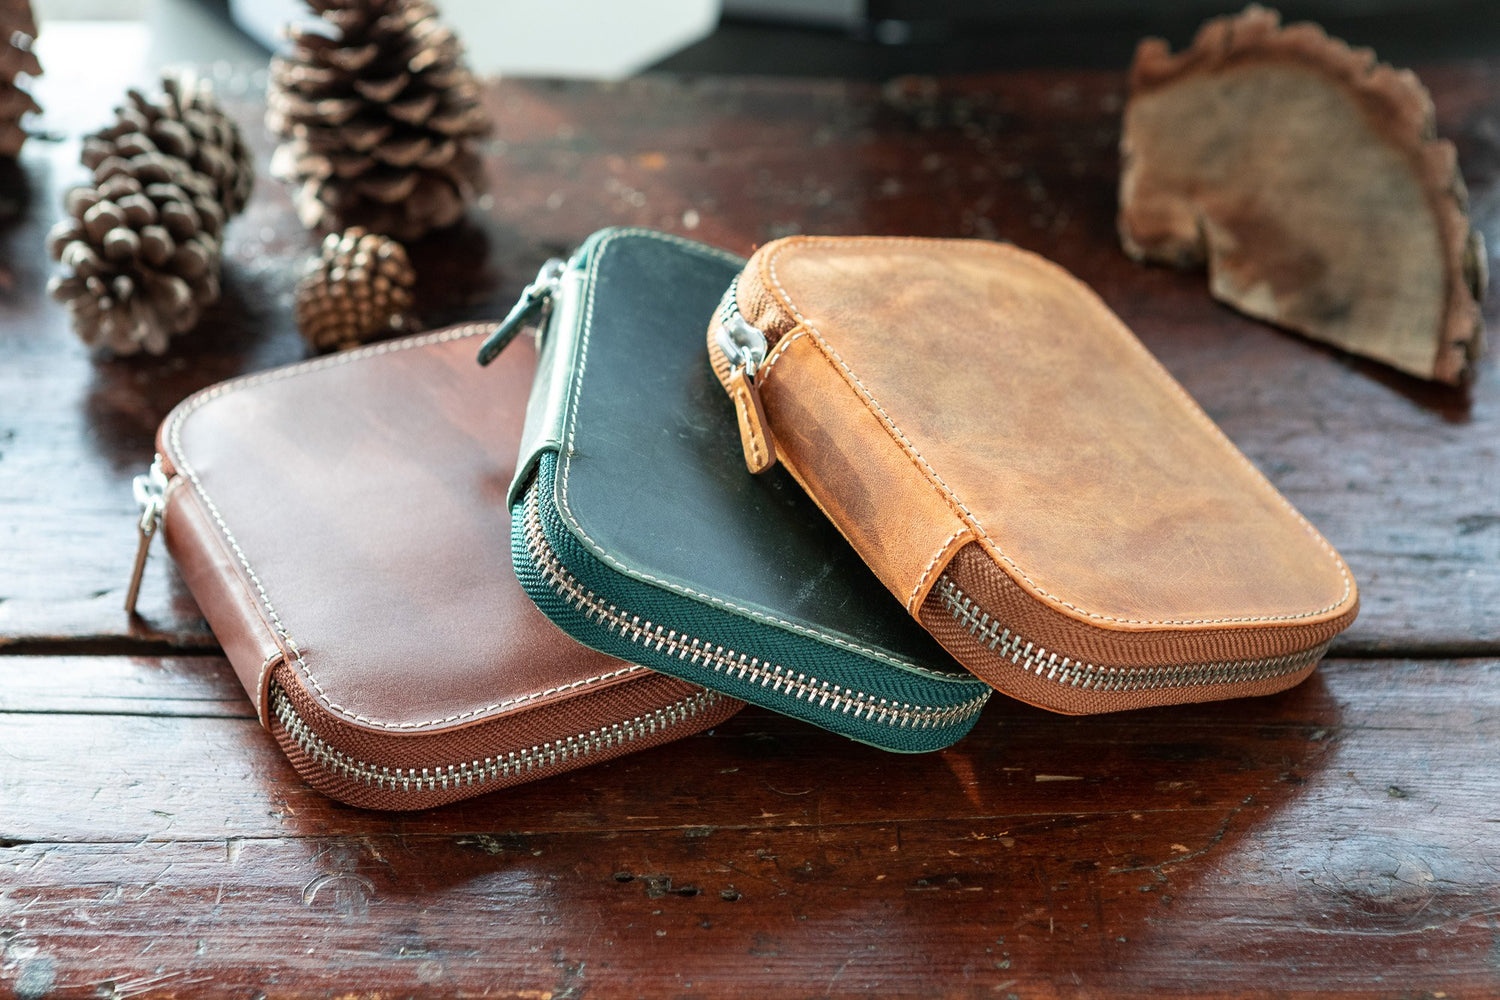 Our 10 Favorite Leather Pen Cases – Truphae